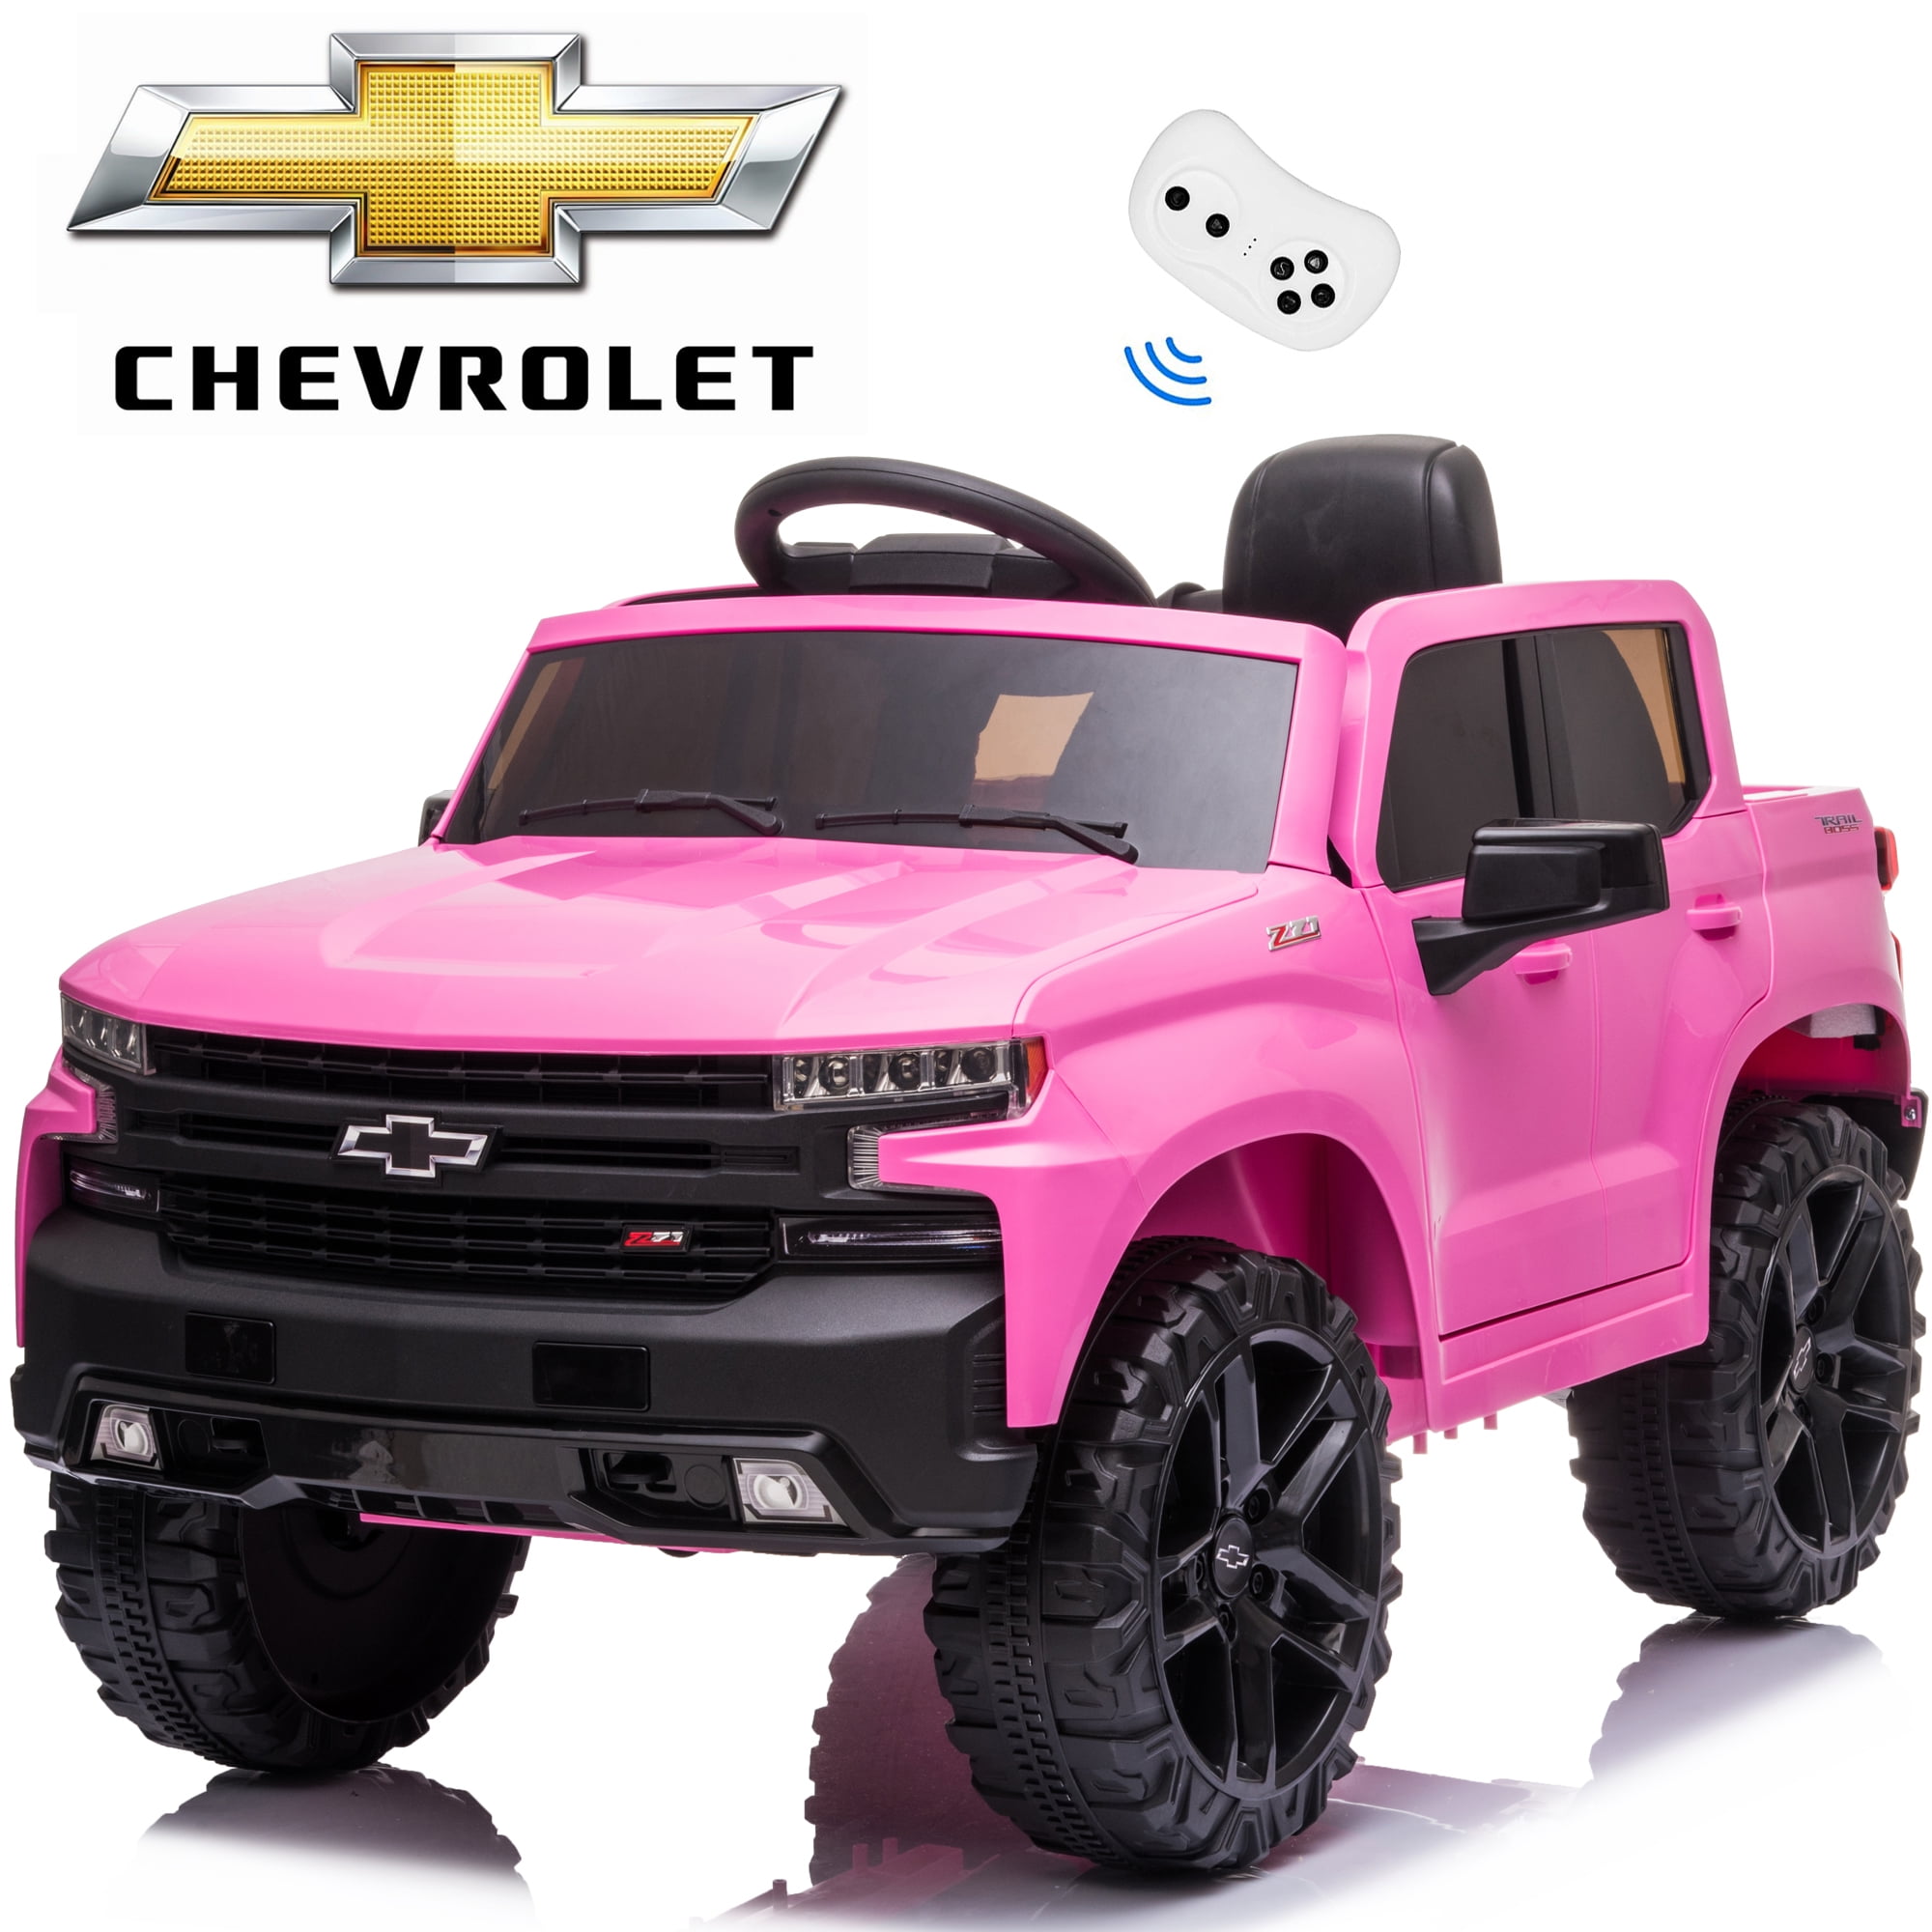 12 Volt Ride on Toys for Kids, Licensed Chevrolet Silverado Ride on Car for Boys Girls, Powered Electric Vehicles Pickup Truck with Remote Control, LED Lights, MPS Player, Pink, W13037